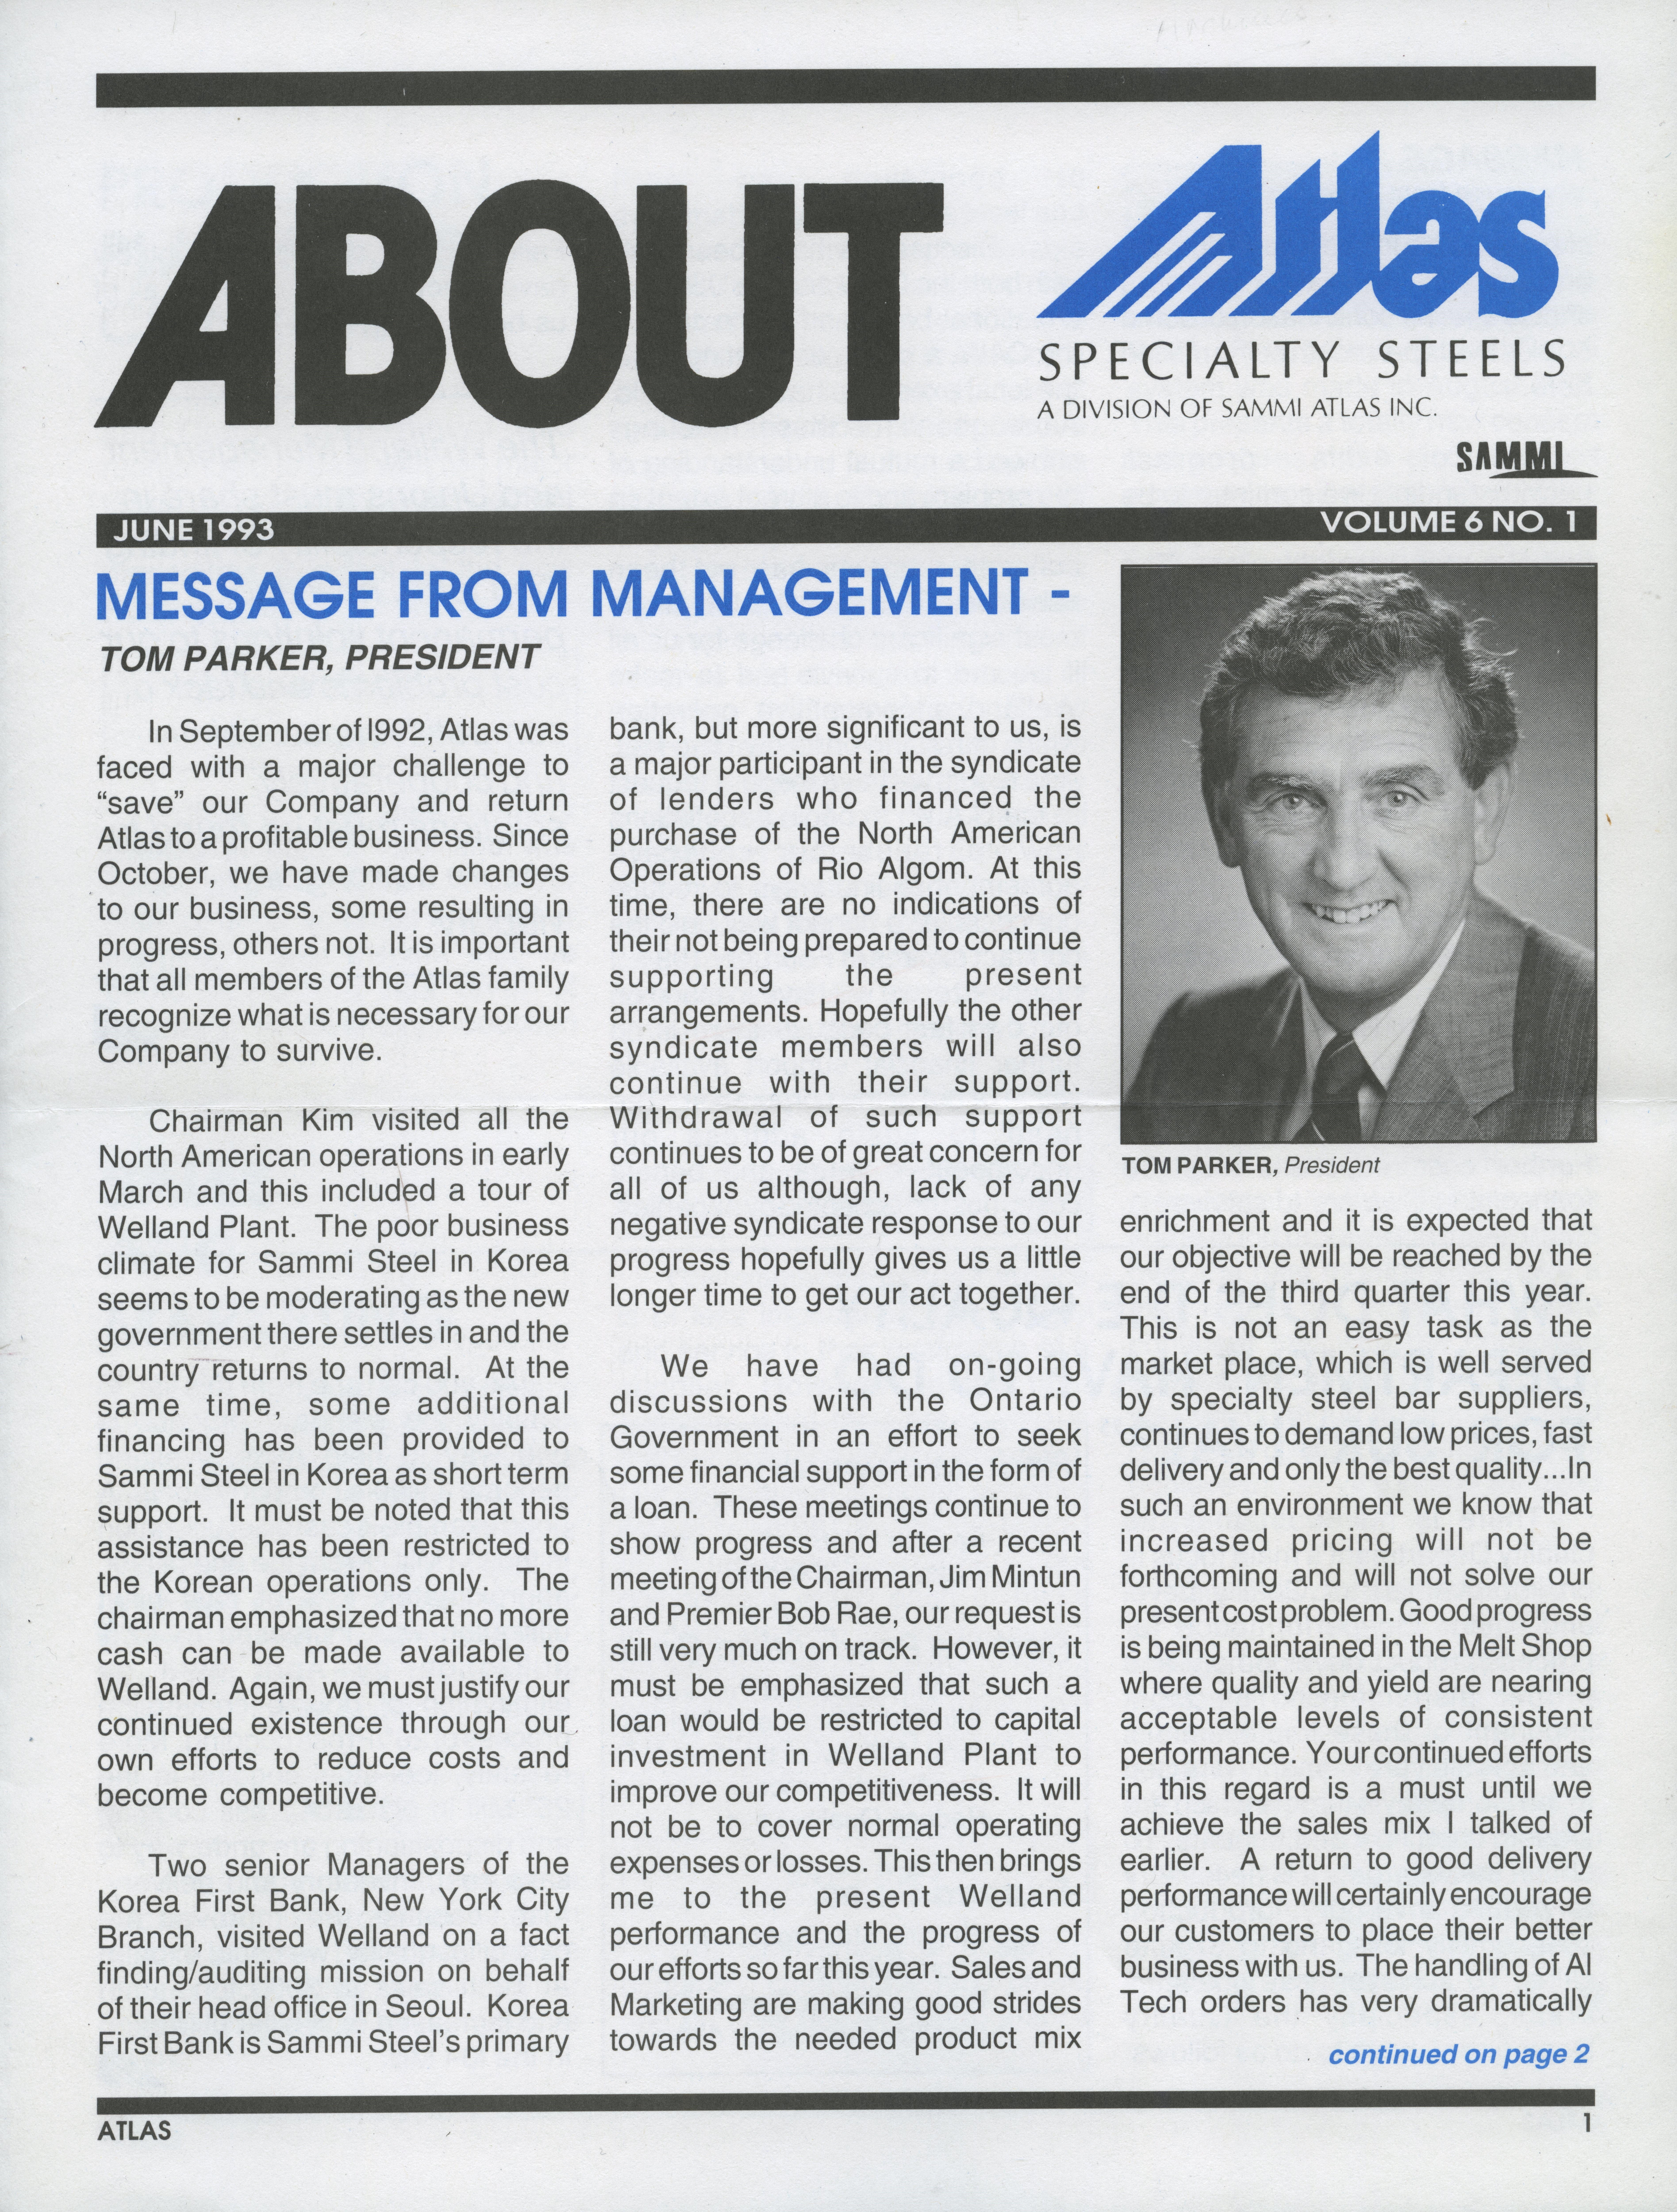 A message from the management by Tom Parker, president. Text with a small portrait of a man. 